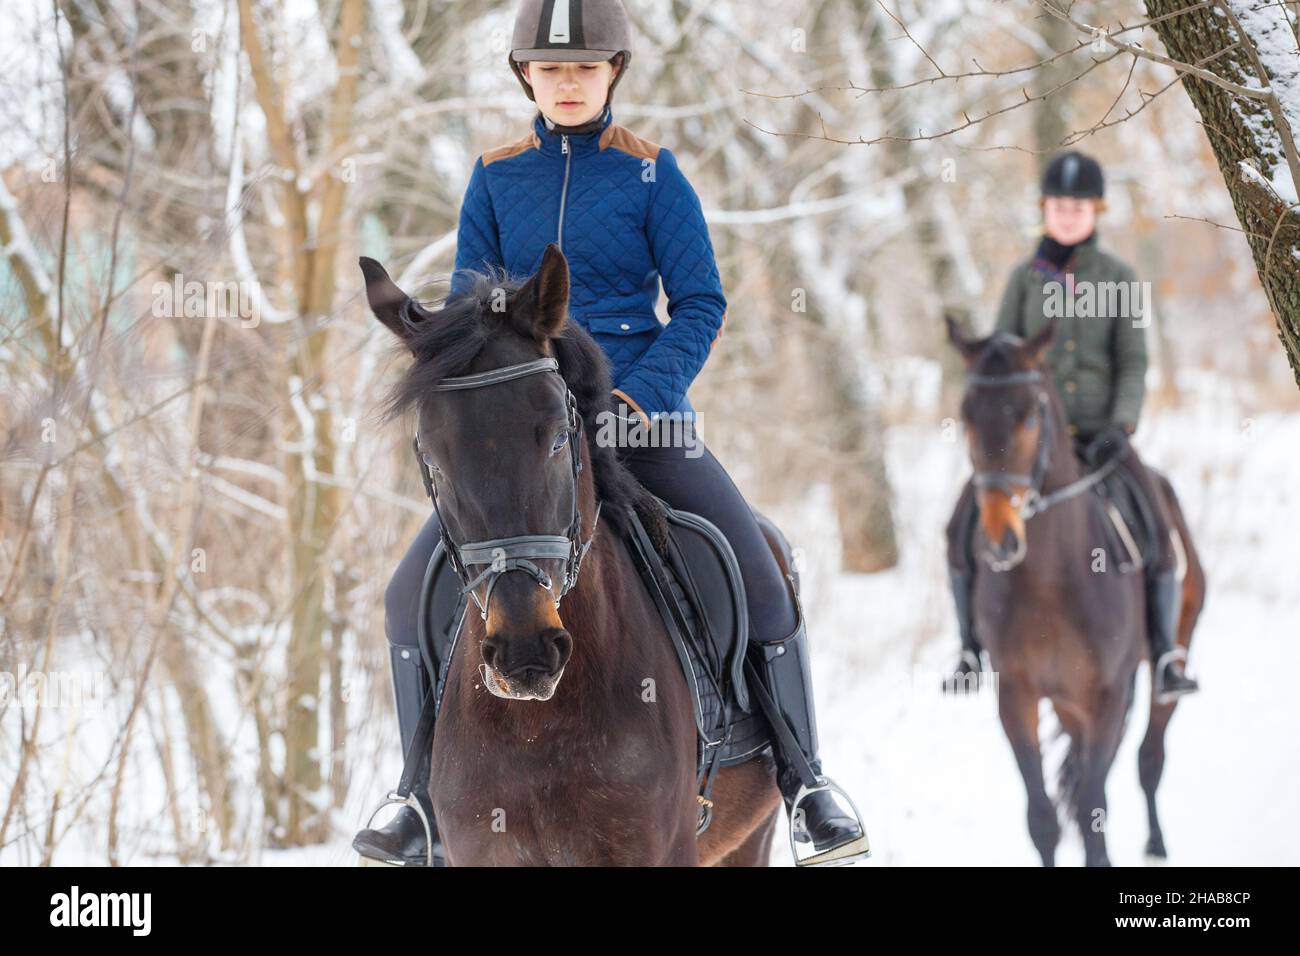 Two young girls riding horse in snowy park in winter Stock Photo